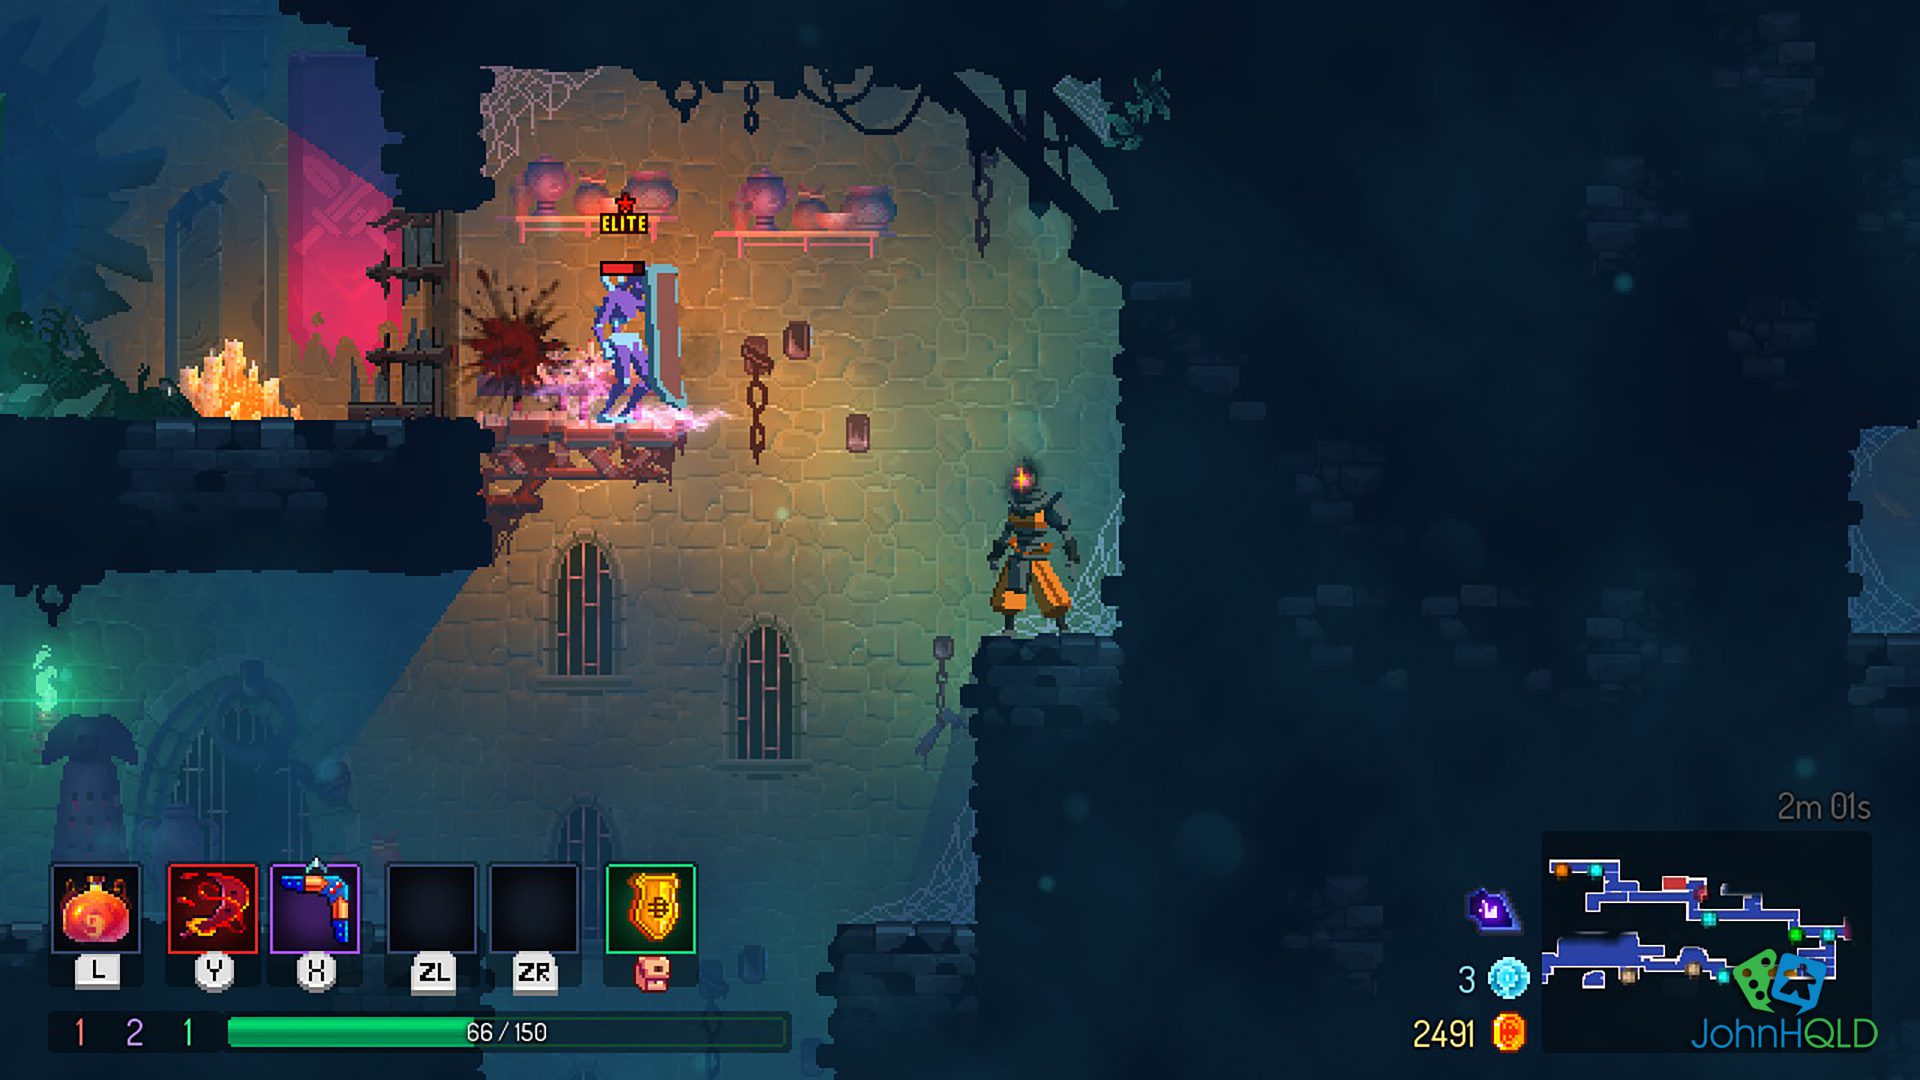 20230224 - Dead Cells - I miss Dead Cells as well